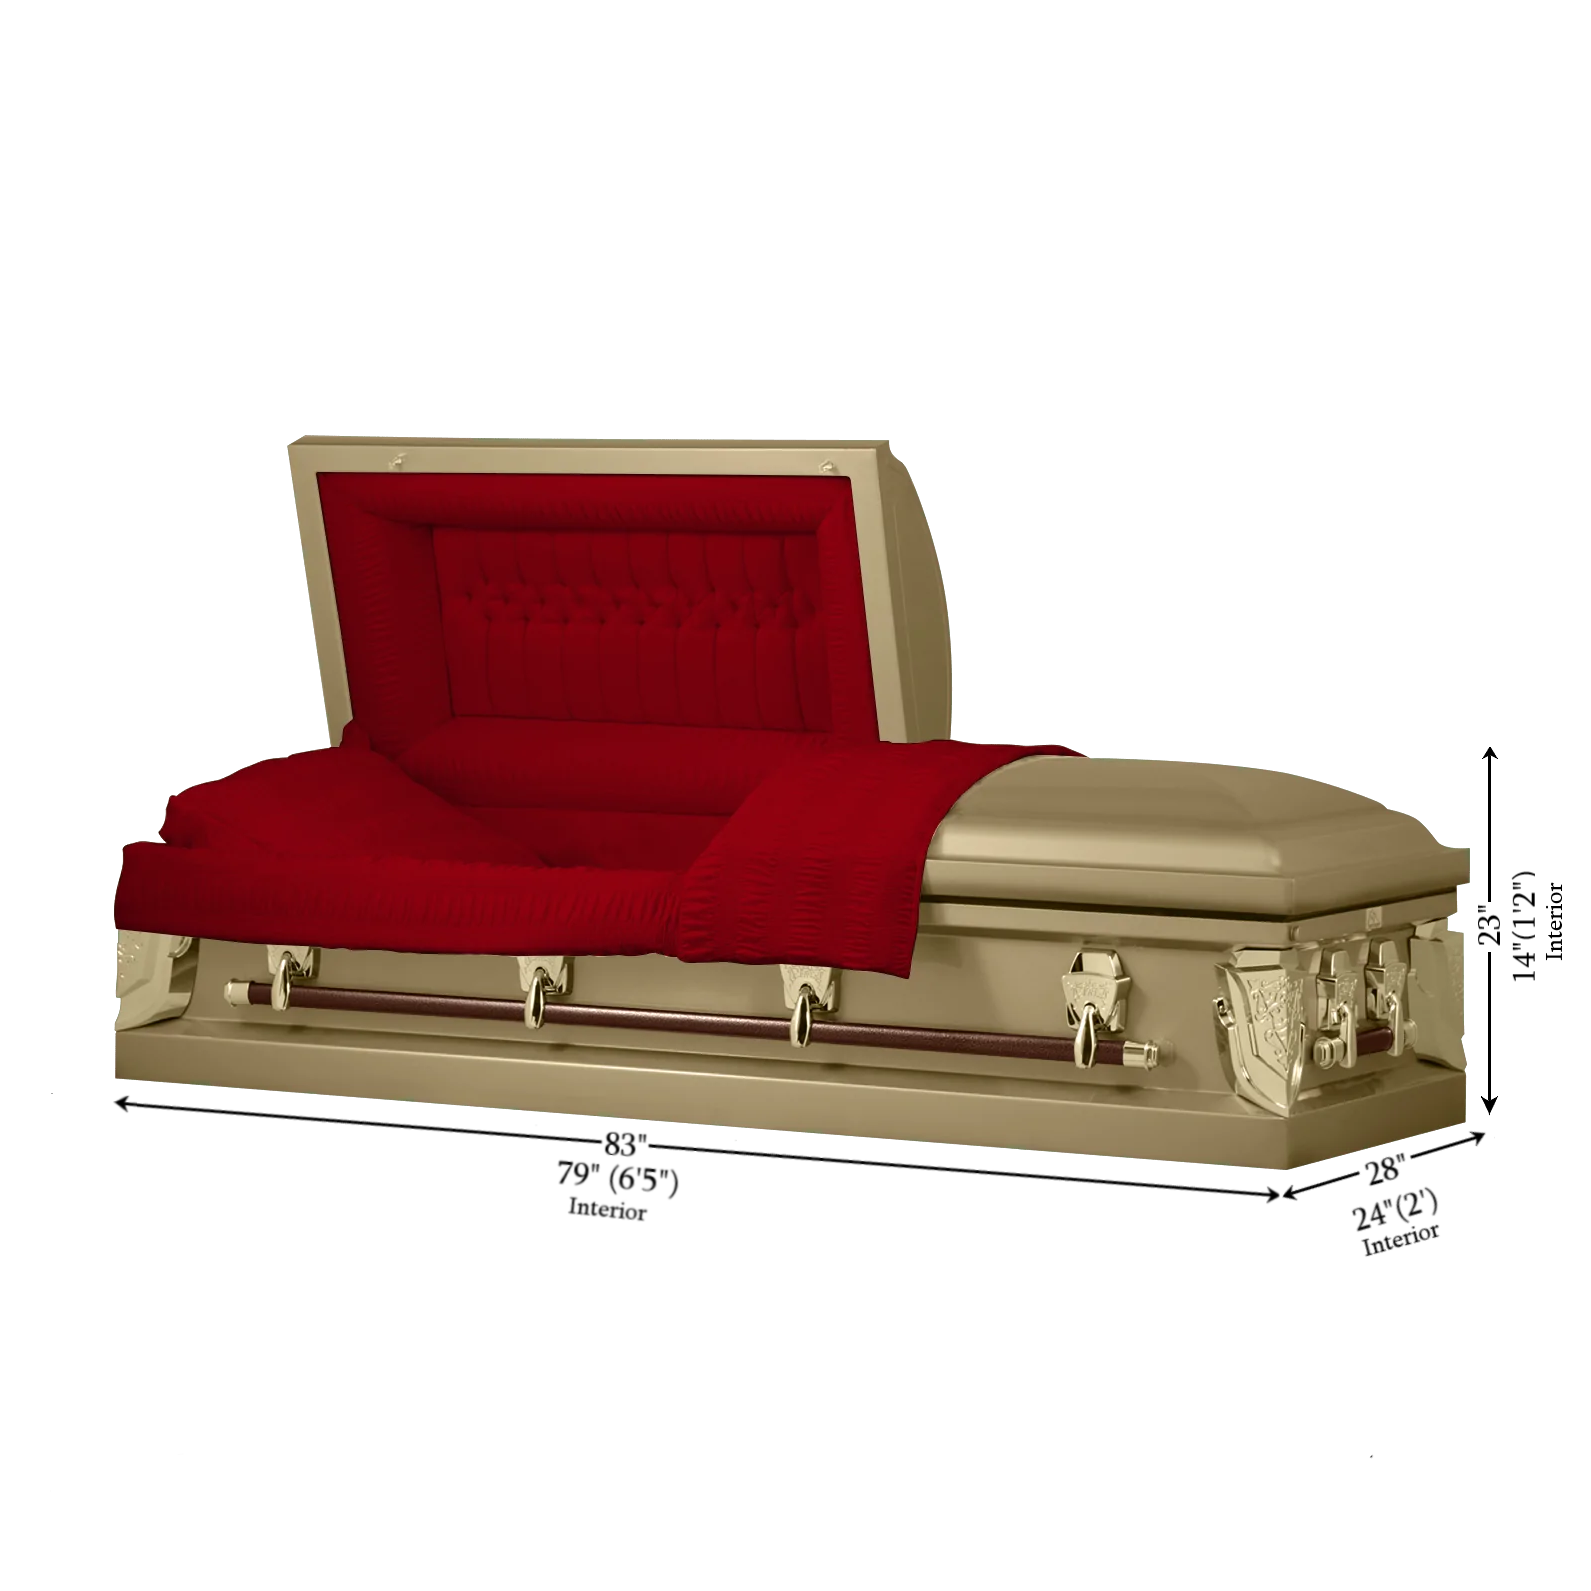 How To Determine The Dimensions Of A Casket Online?